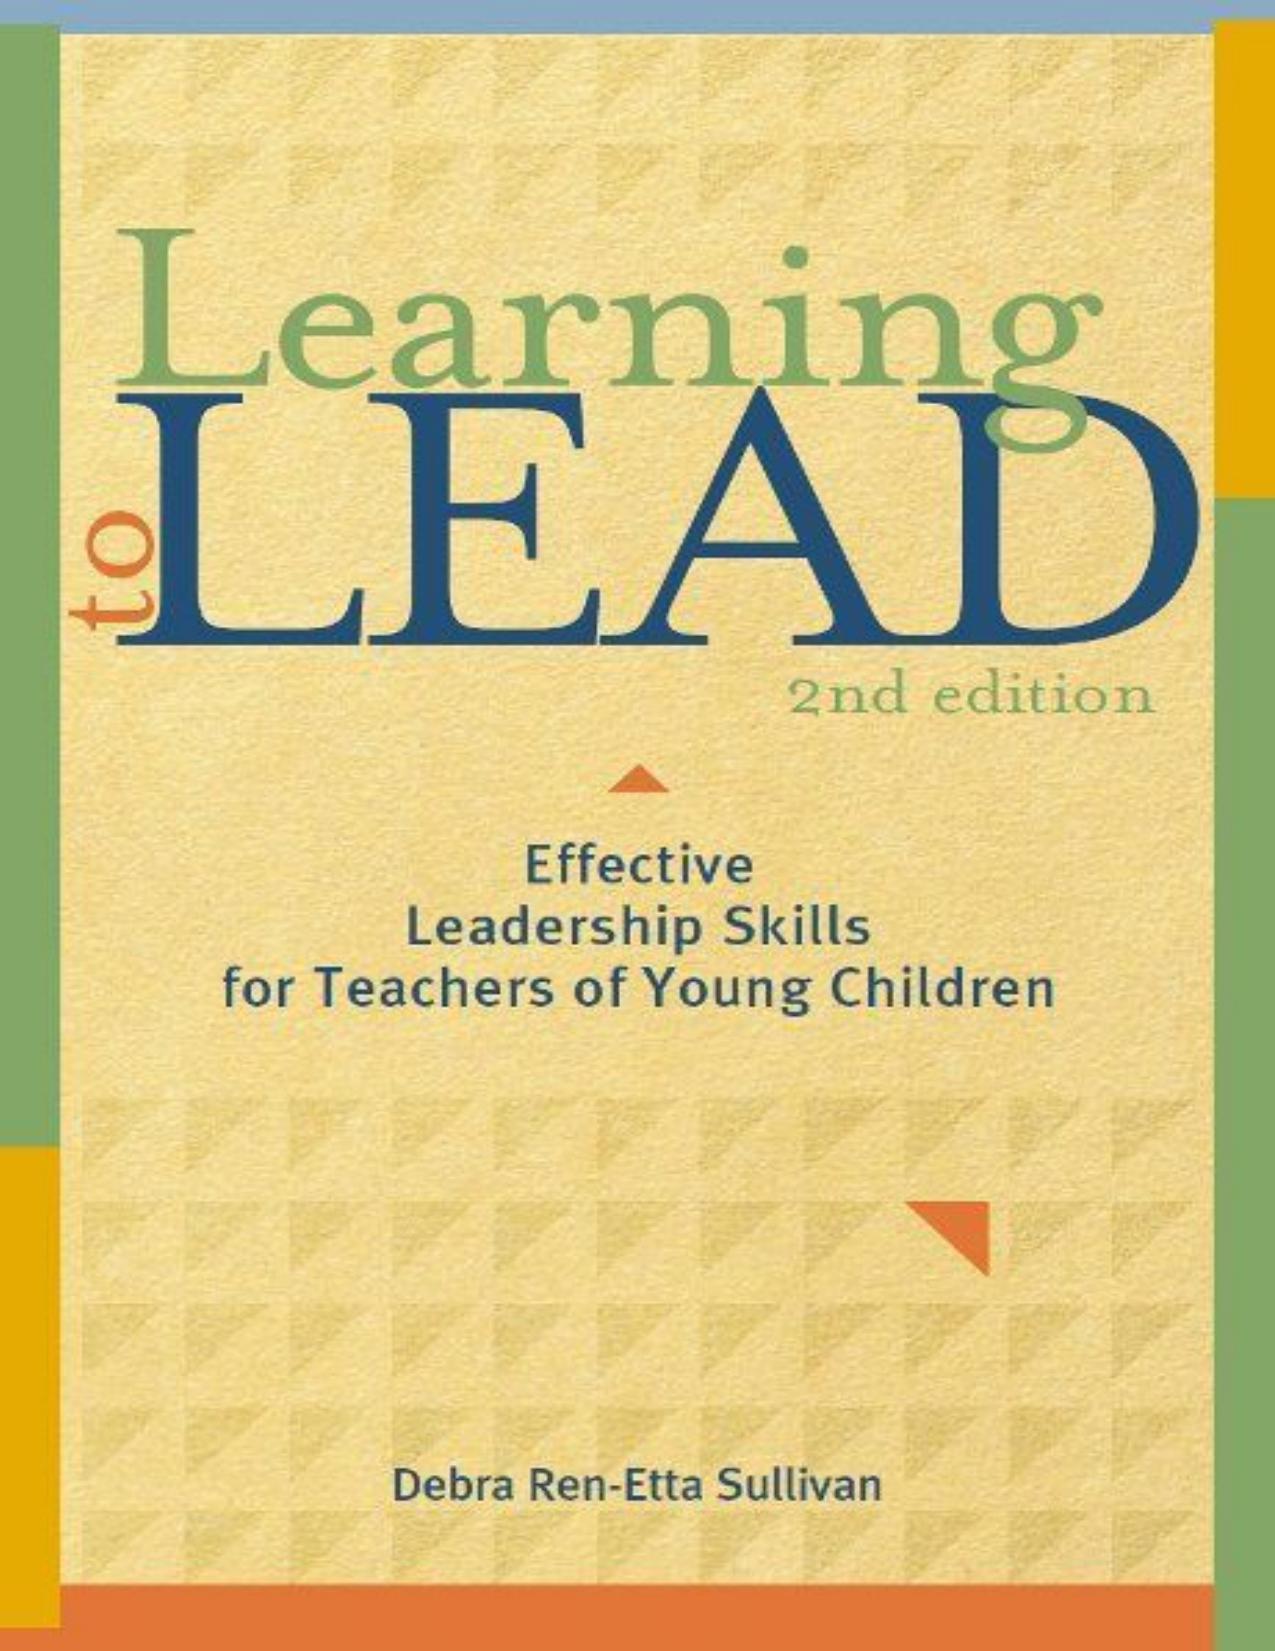 Learning to Lead, Second Edition_ Effective Leadership Skills for Teachers of Young Children (NONE).jpg